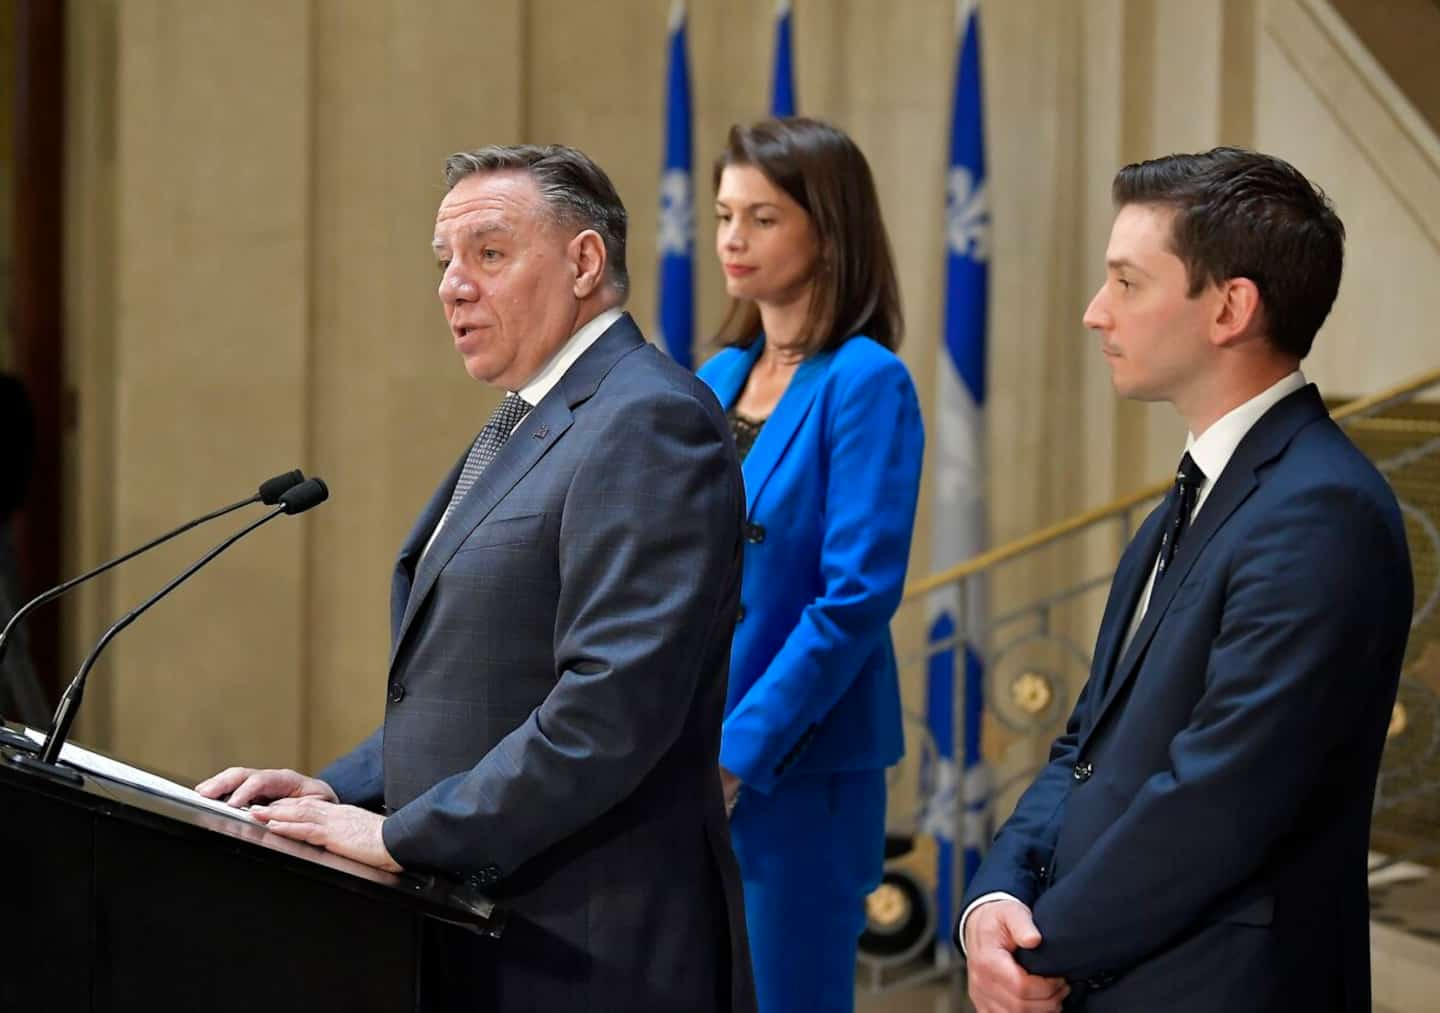 4 years of CAQ: promising, but can do better